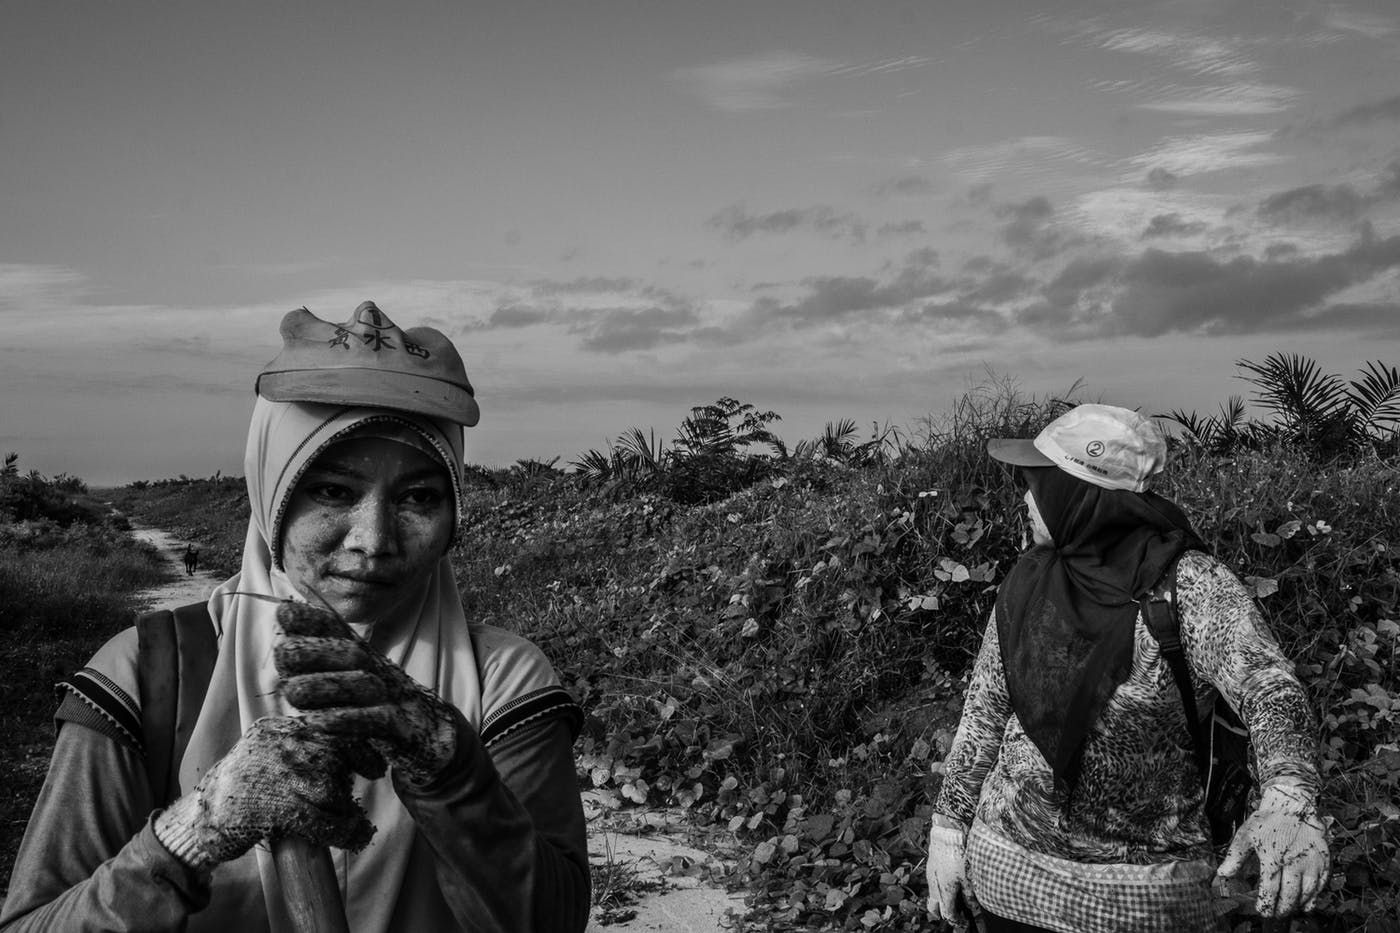 Plantation workers Supraetun and Asnia in a plantation in Kandis, a subdistrict of Riau. Image by Xyza Cruz Bacani. Indonesia, 2018.